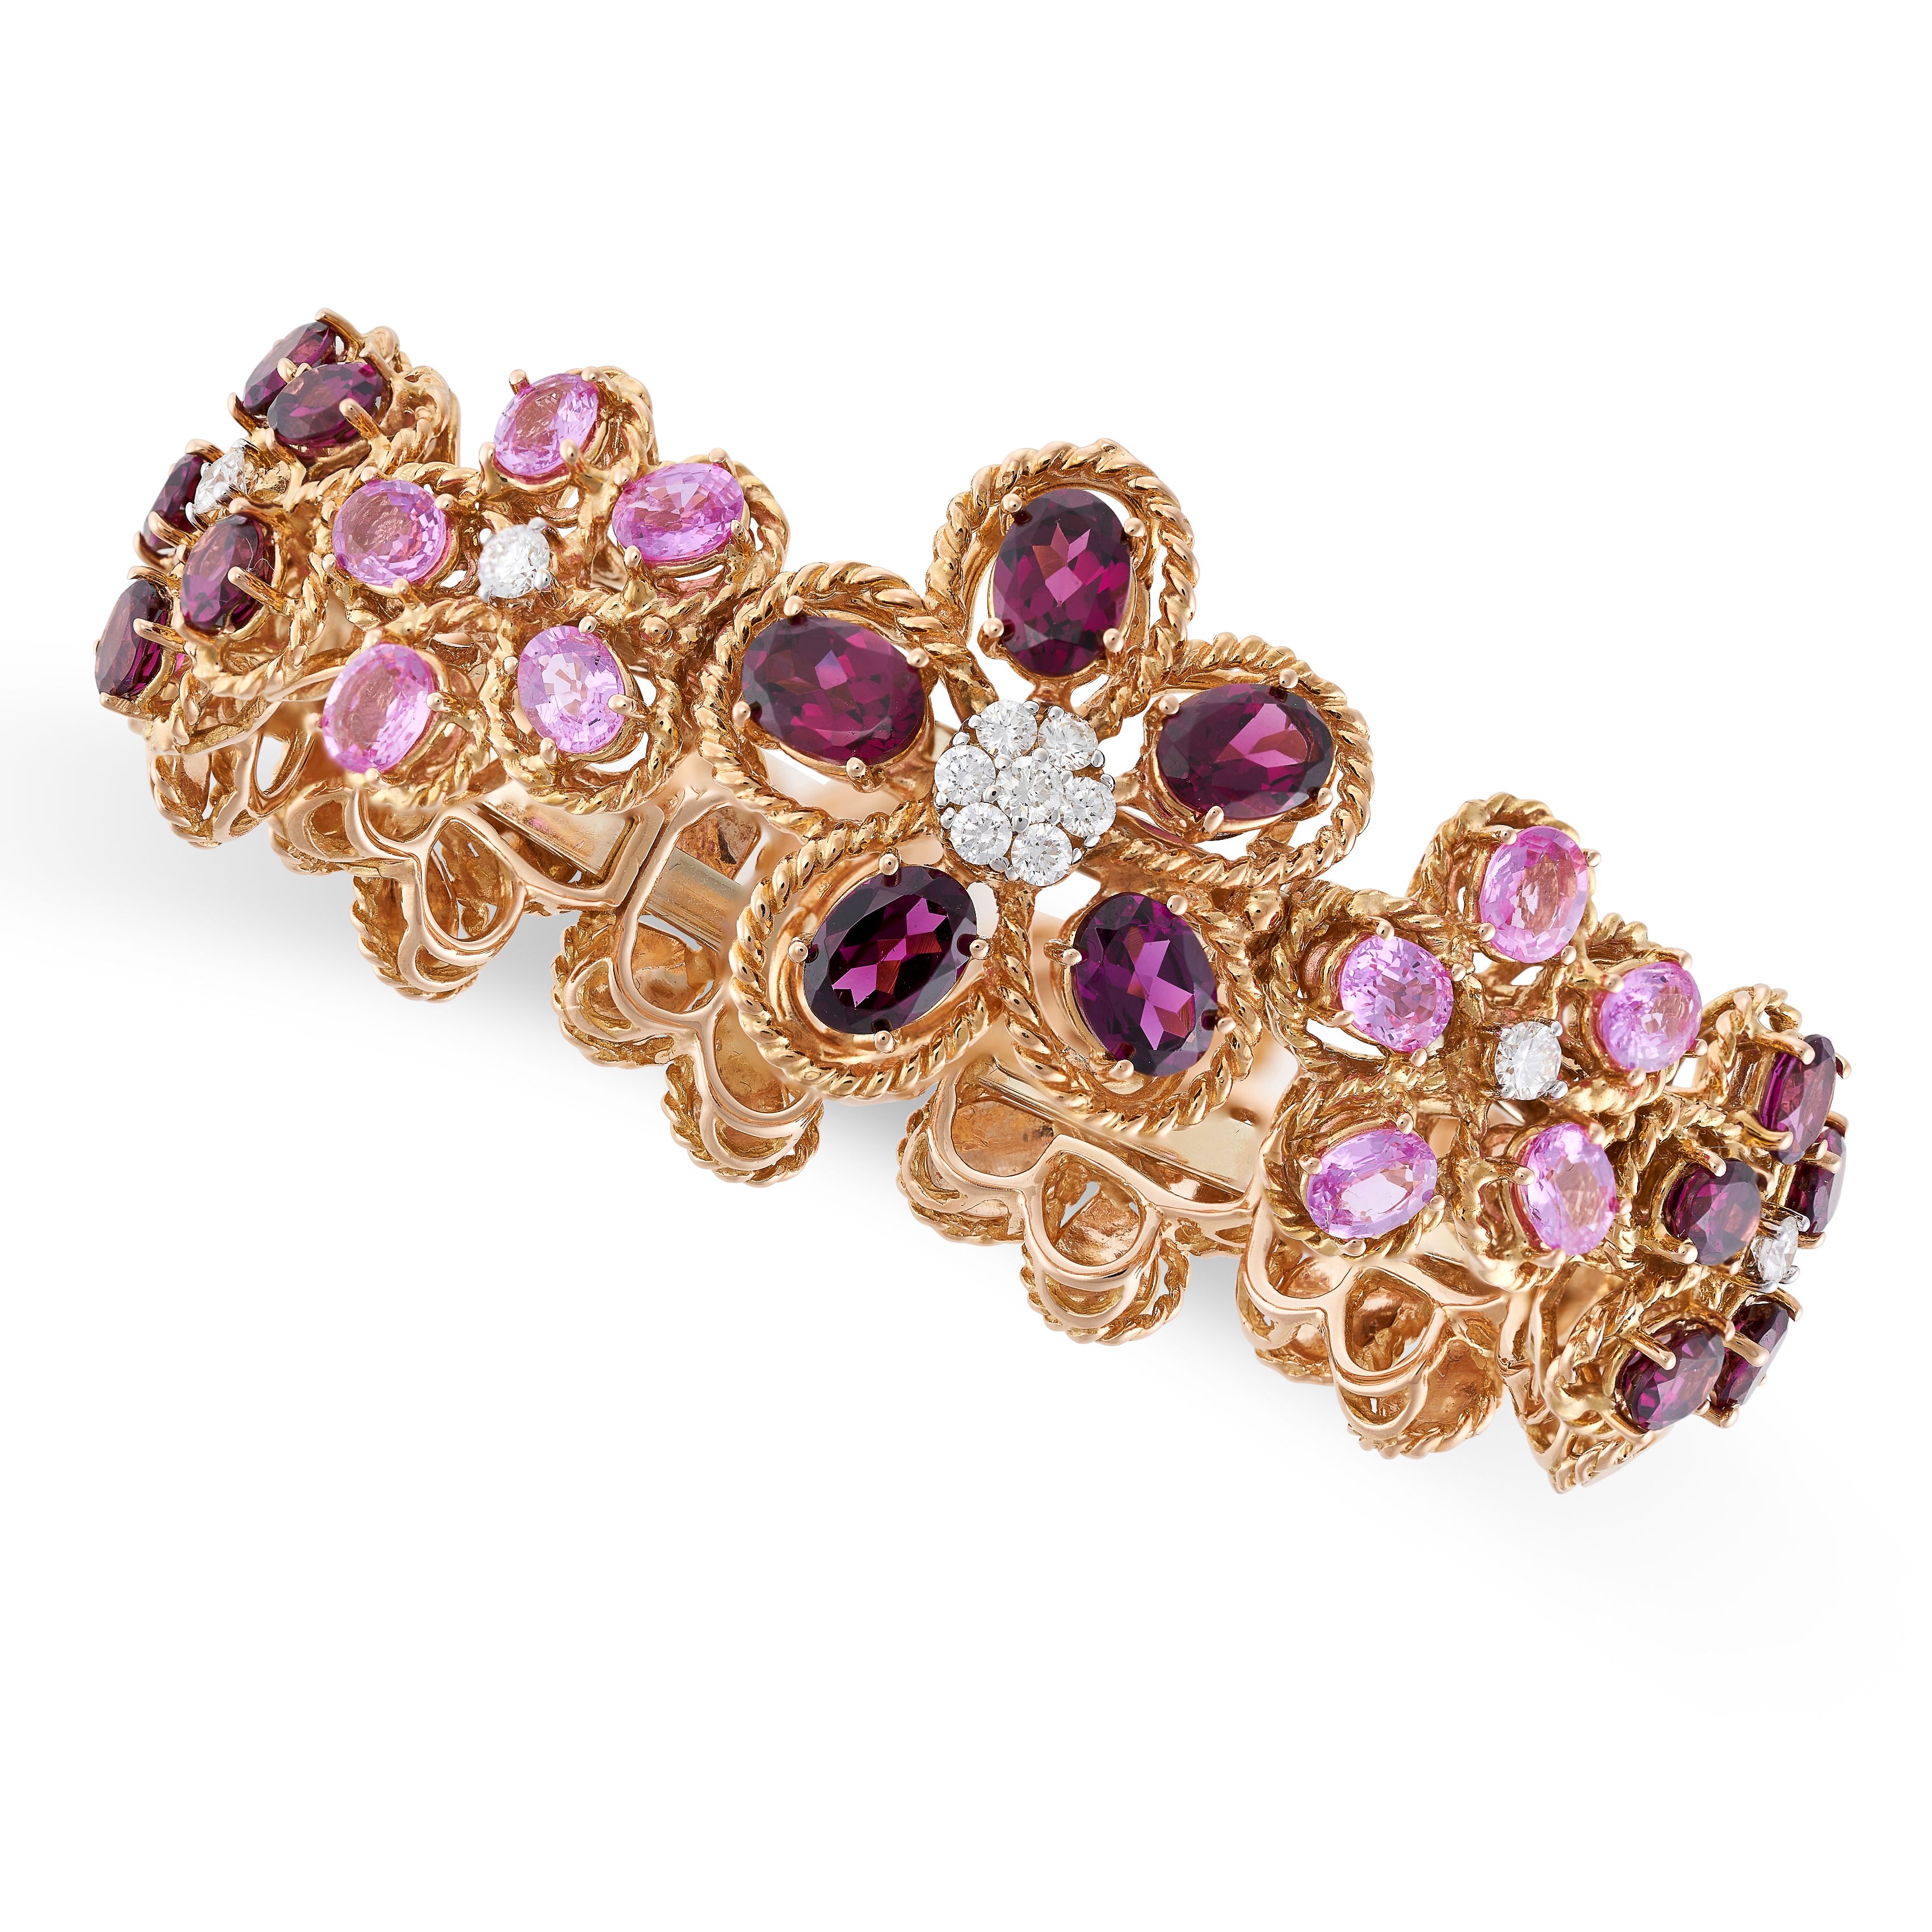 A RHODOLITE GARNET, PINK SAPPHIRE AND DIAMOND BANGLE in 18ct gold, comprising a series of